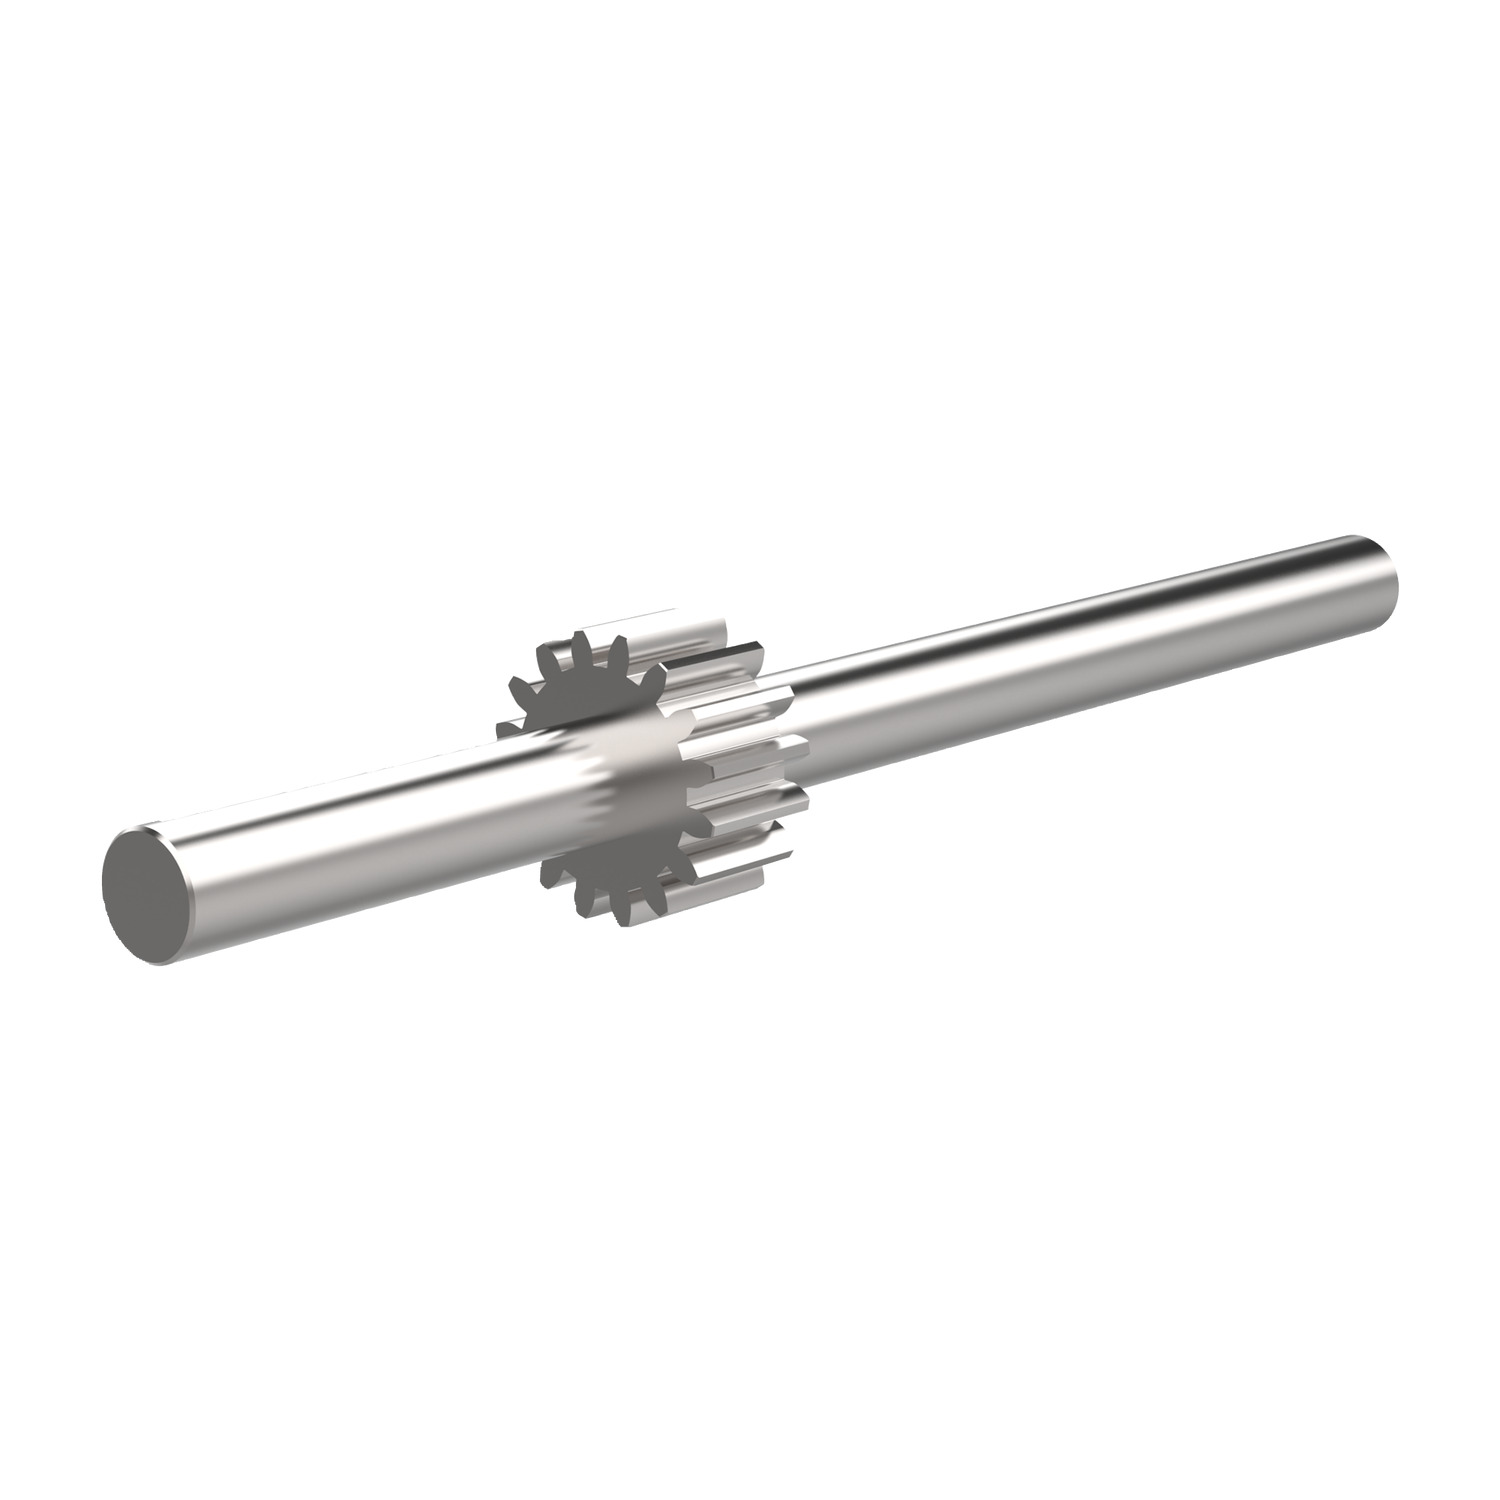 R5144 Spur Gears - Module 0.8 - Stainless